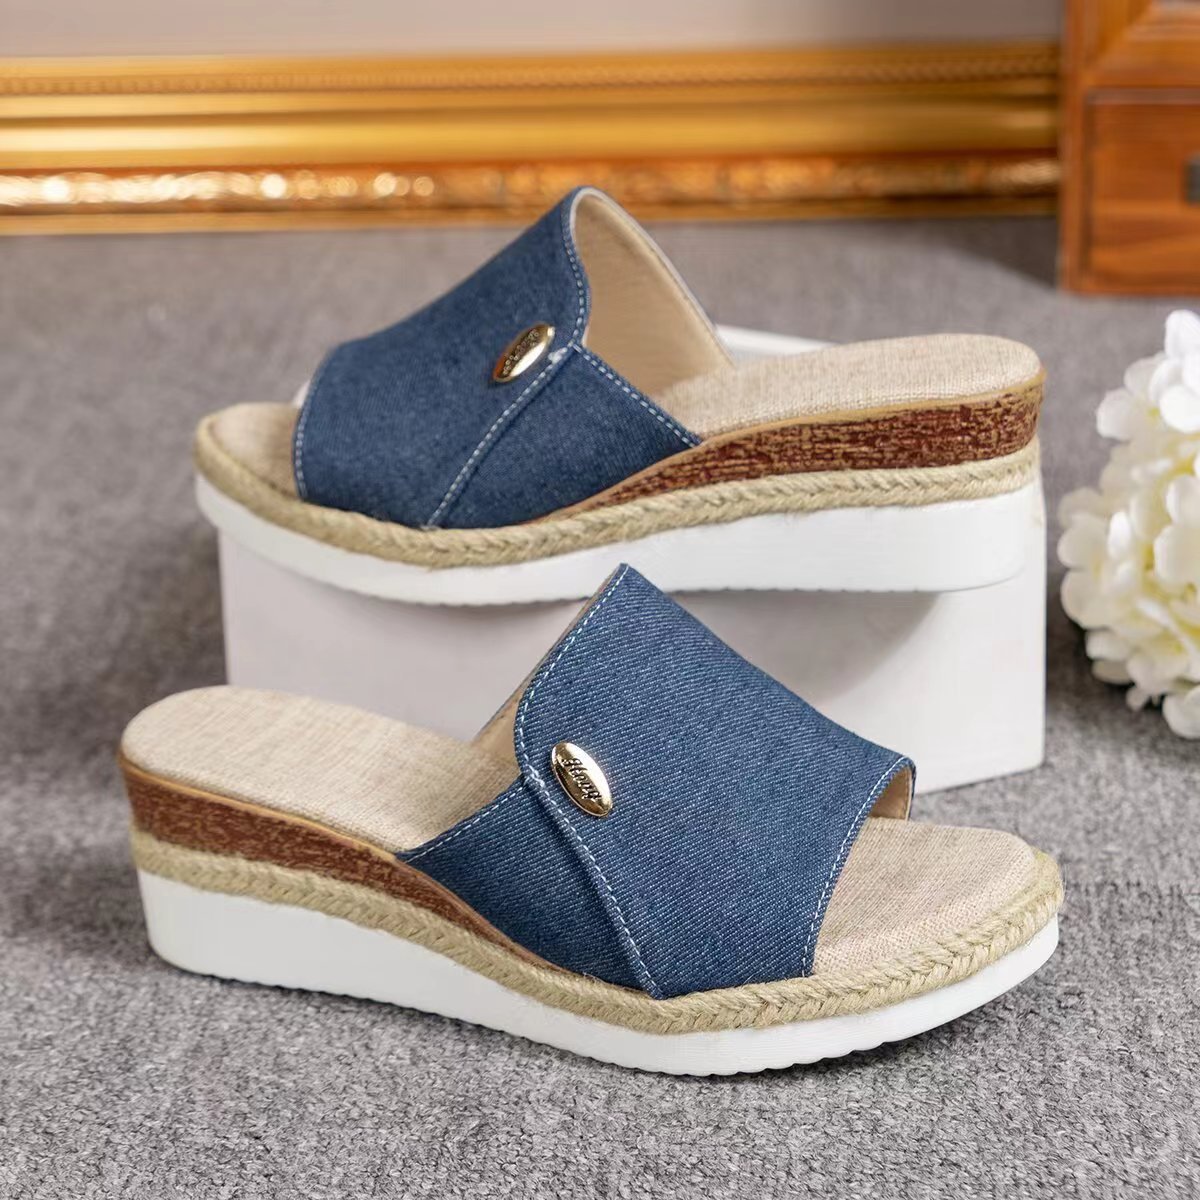 Denim Canvas Wedges Sandals Summer Fashion Hemp High Heel Slippers Outdoor Thick Bottom Fish Mouth Shoes For Women